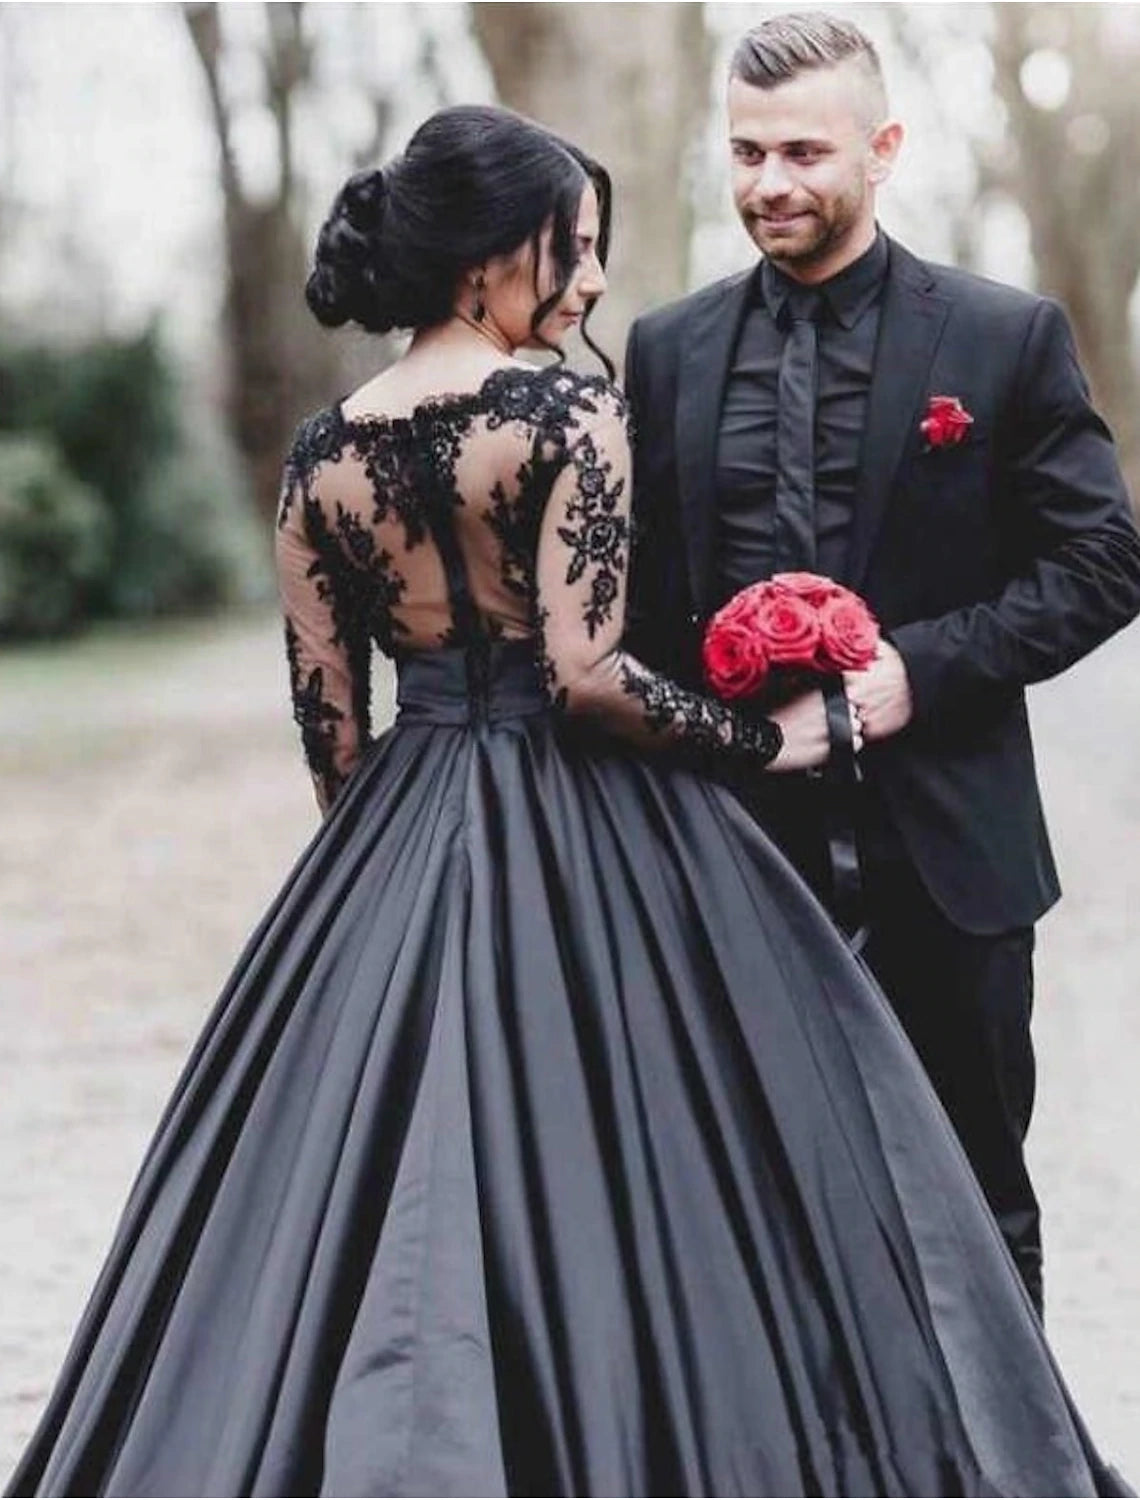 Engagement Gothic Wedding Dresses A-Line Illusion Neck Long Sleeve Floor Length Satin Bridal Gowns With Draping Appliques